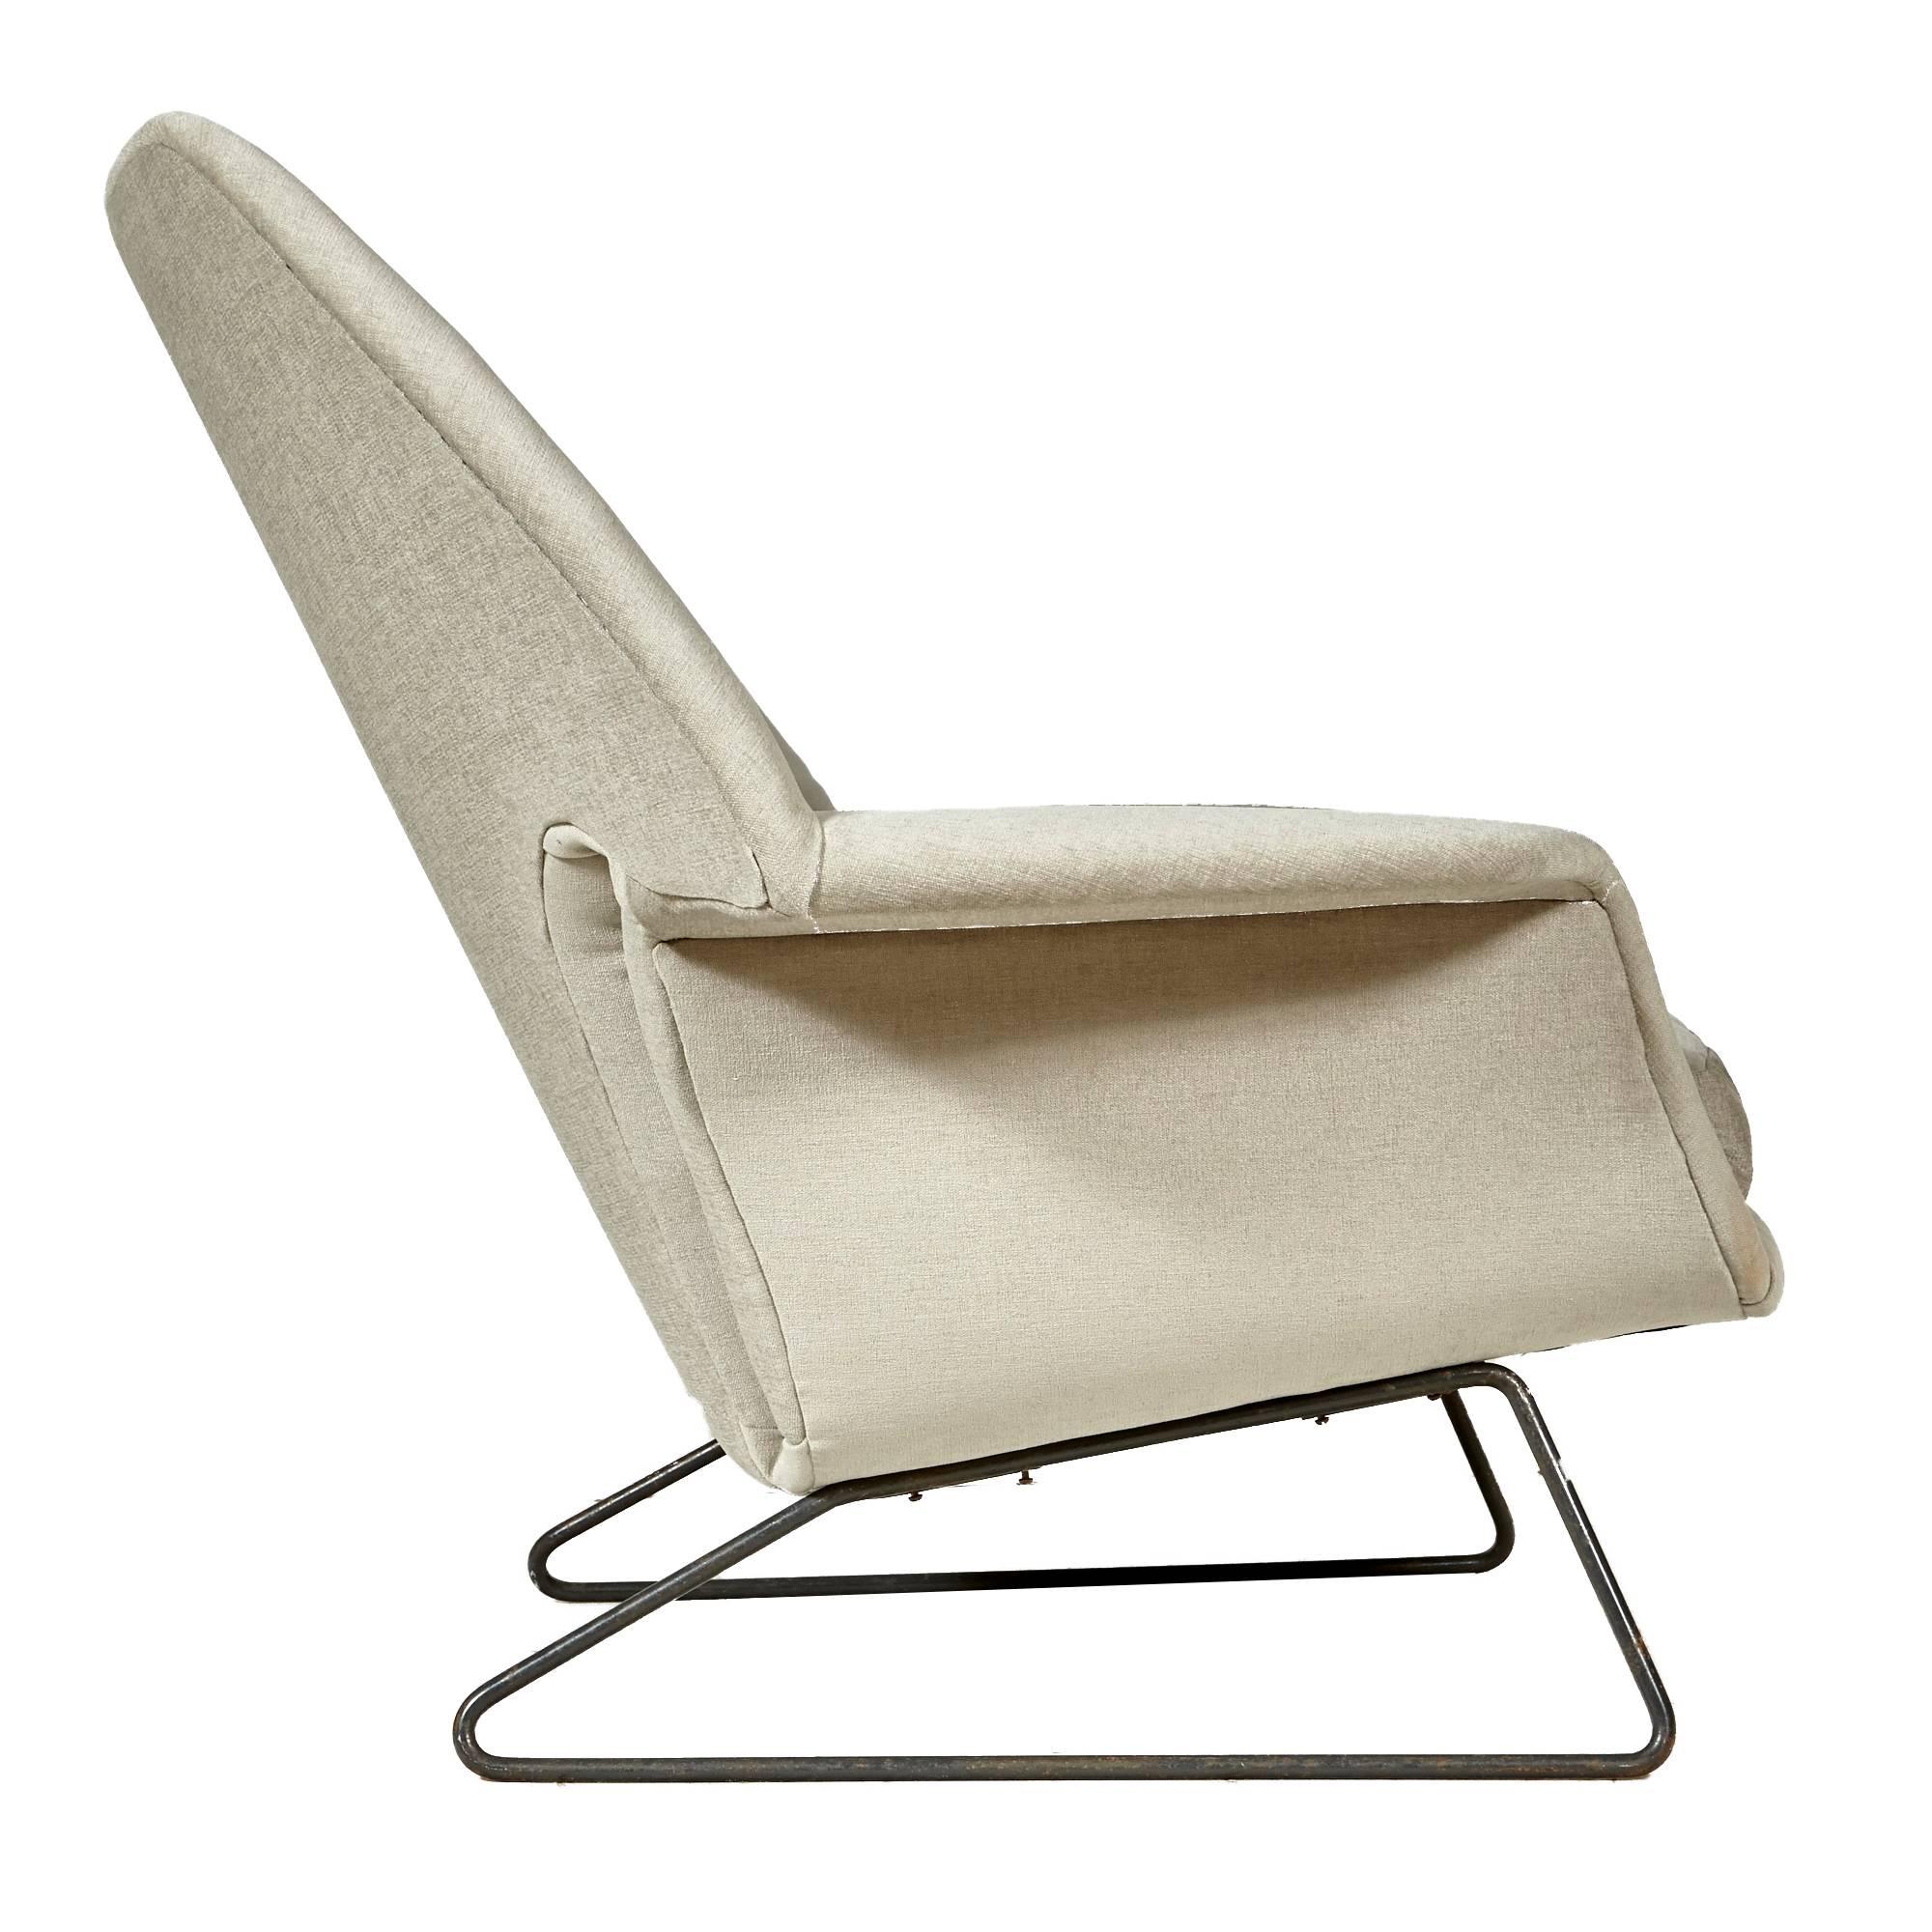 Vintage 1950s lounge chair with a metal sled leg base in the manner of Carlo Hauner & Martin Eisler. Wide back and curved arms on a slanted metal base. Newly reupholstered in a light grey Kravet chenille fabric. Seat, 16" H. Arm, 18.5"